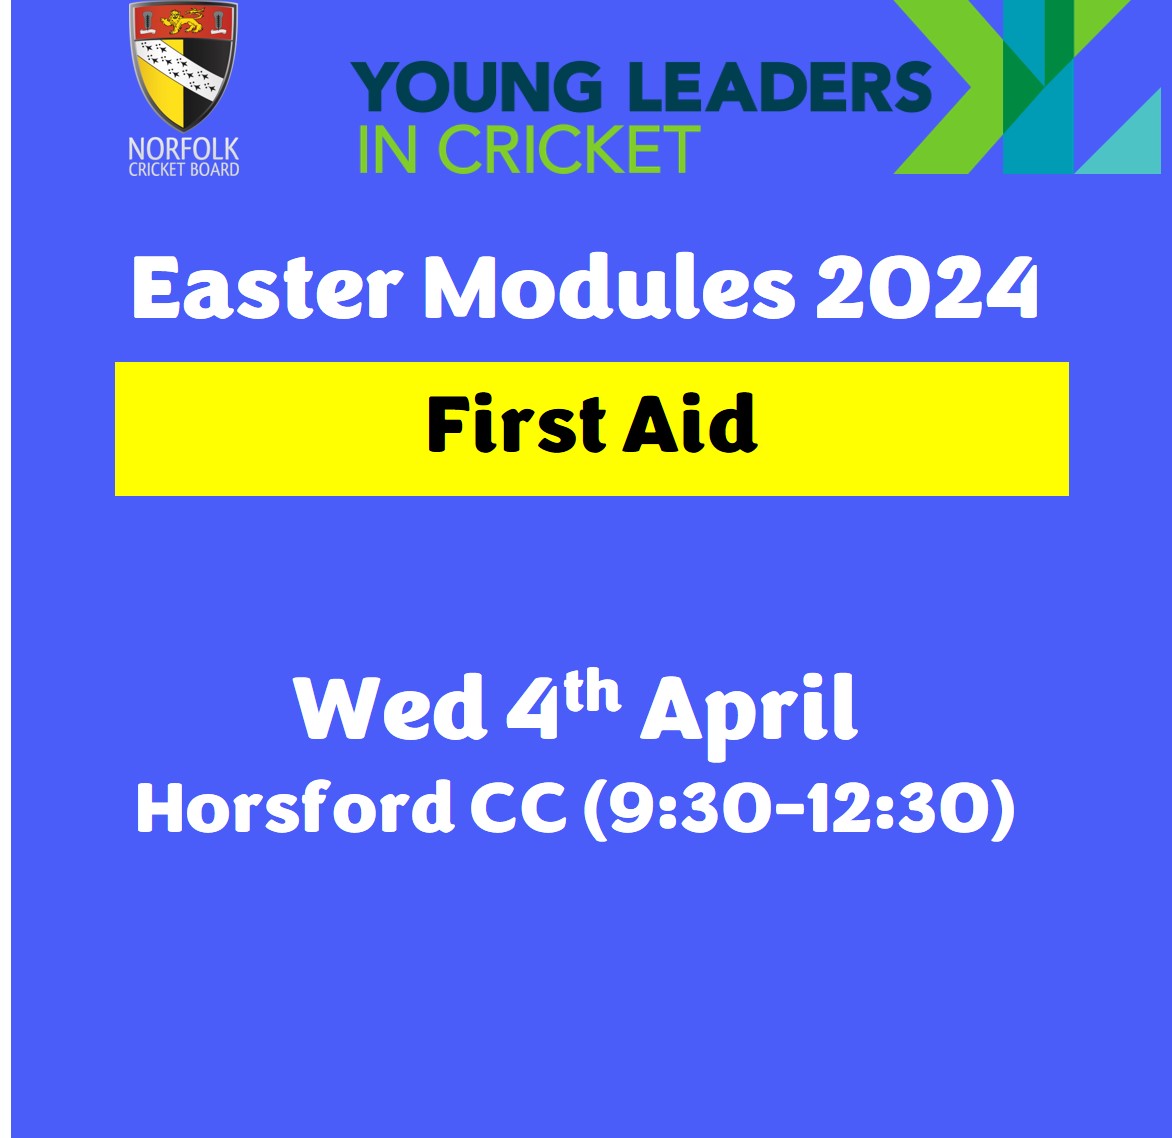 Young Leaders In Cricket is back for 2024 (14-16 Years)🏏 The programme will see candidates complete modules on Coaching, Officiating, Groundskeeping, Fundraising and First Aid! Modules this Easter and throughout 2024 school holidays! BOOK Today 🔗 norfolkcricket.co.uk/young-leaders-…